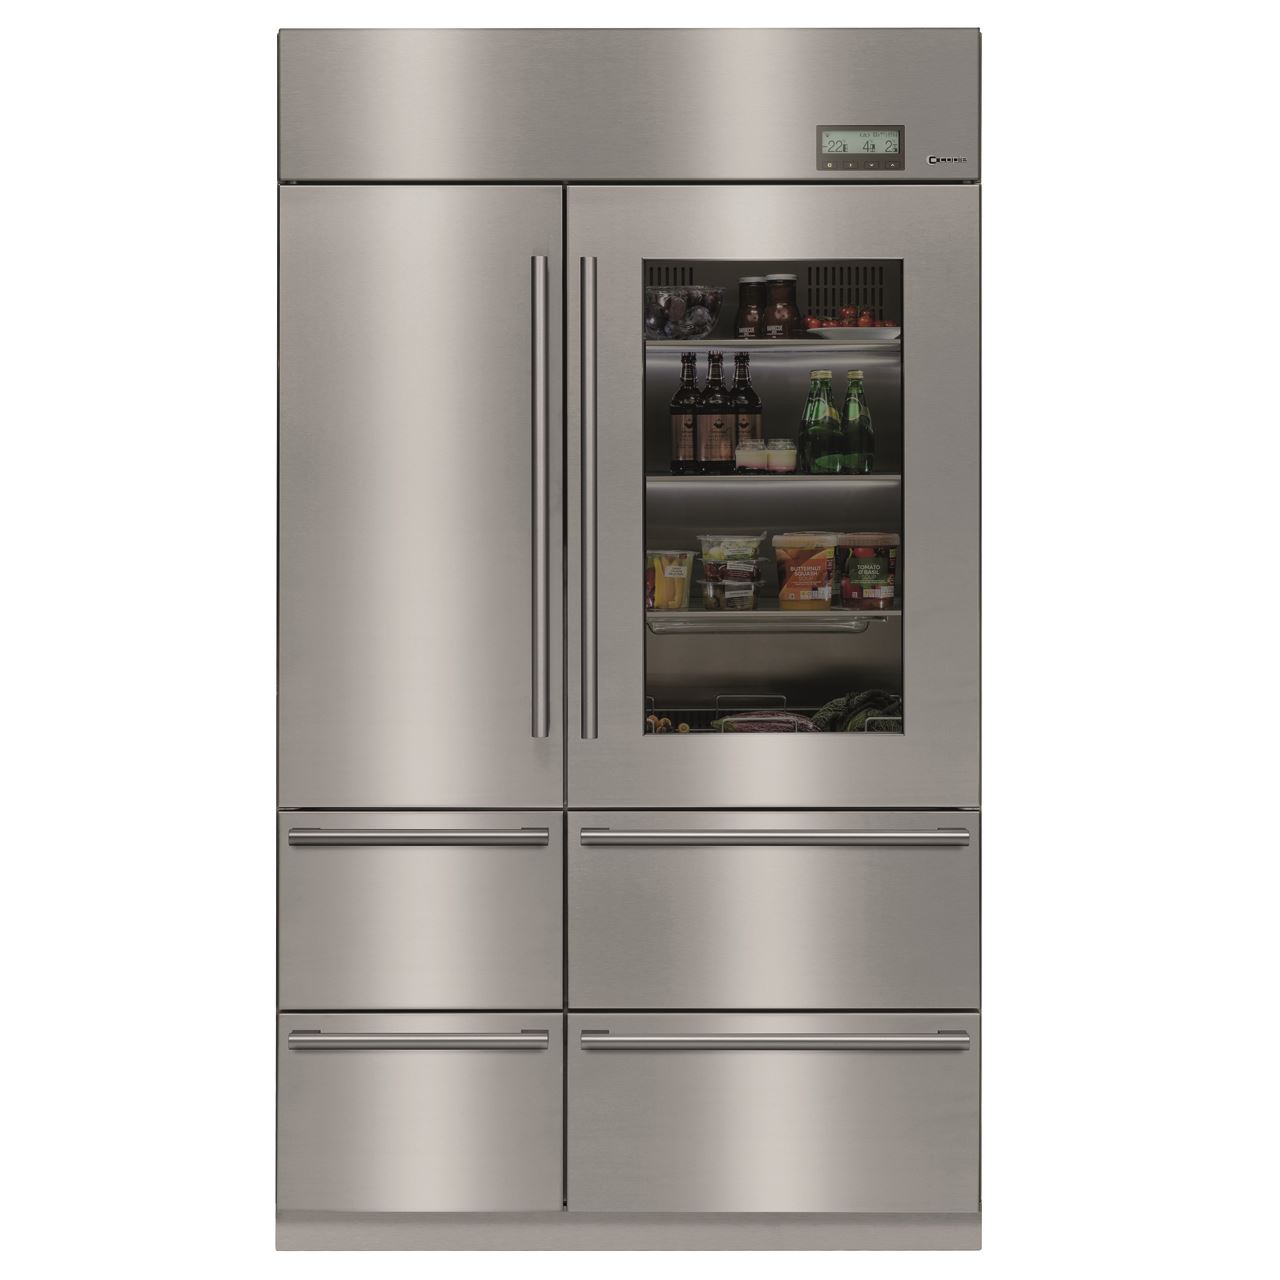 Buy The Caple Caff60 American Fridge Freezers Delivery To